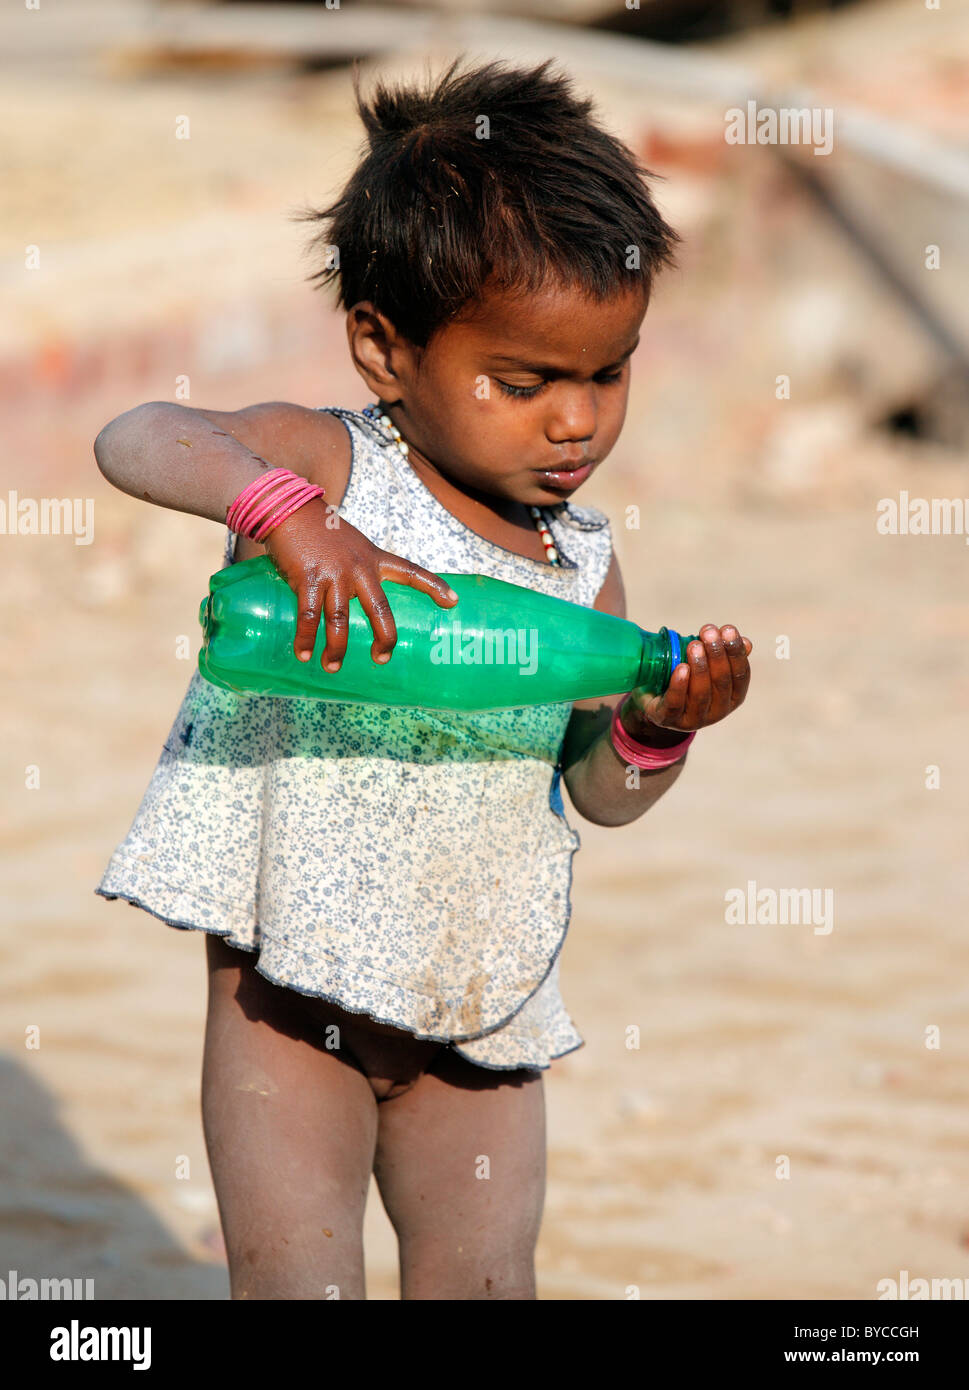 Kid,youngster,baby,construction site,happy,cheerful,prankster,enjoying,bottle,'bottle of water,drinking,baby Stock Photo